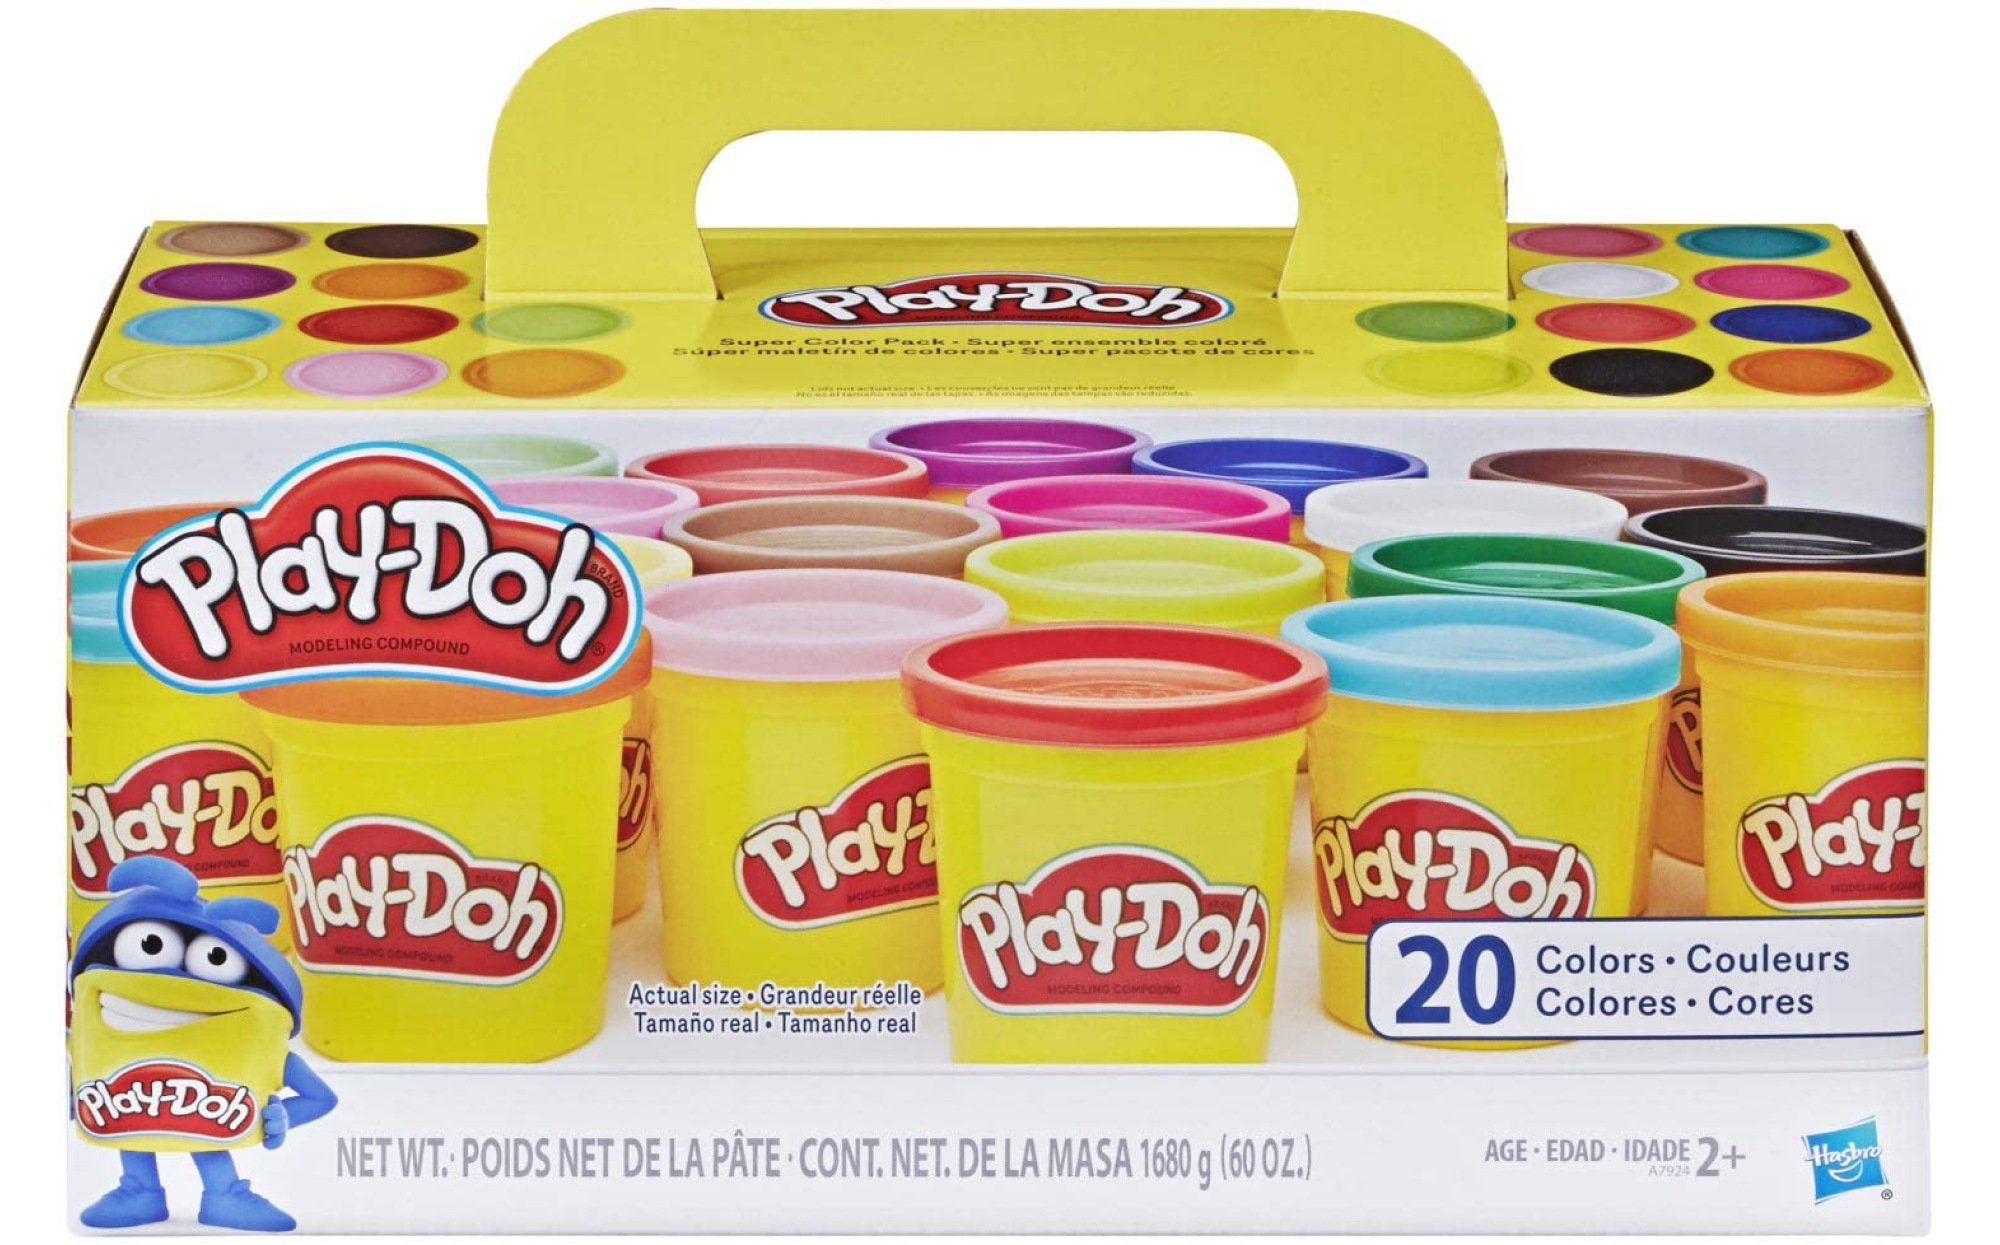 Play-Doh Storage Multicolor Table Toys for Children's